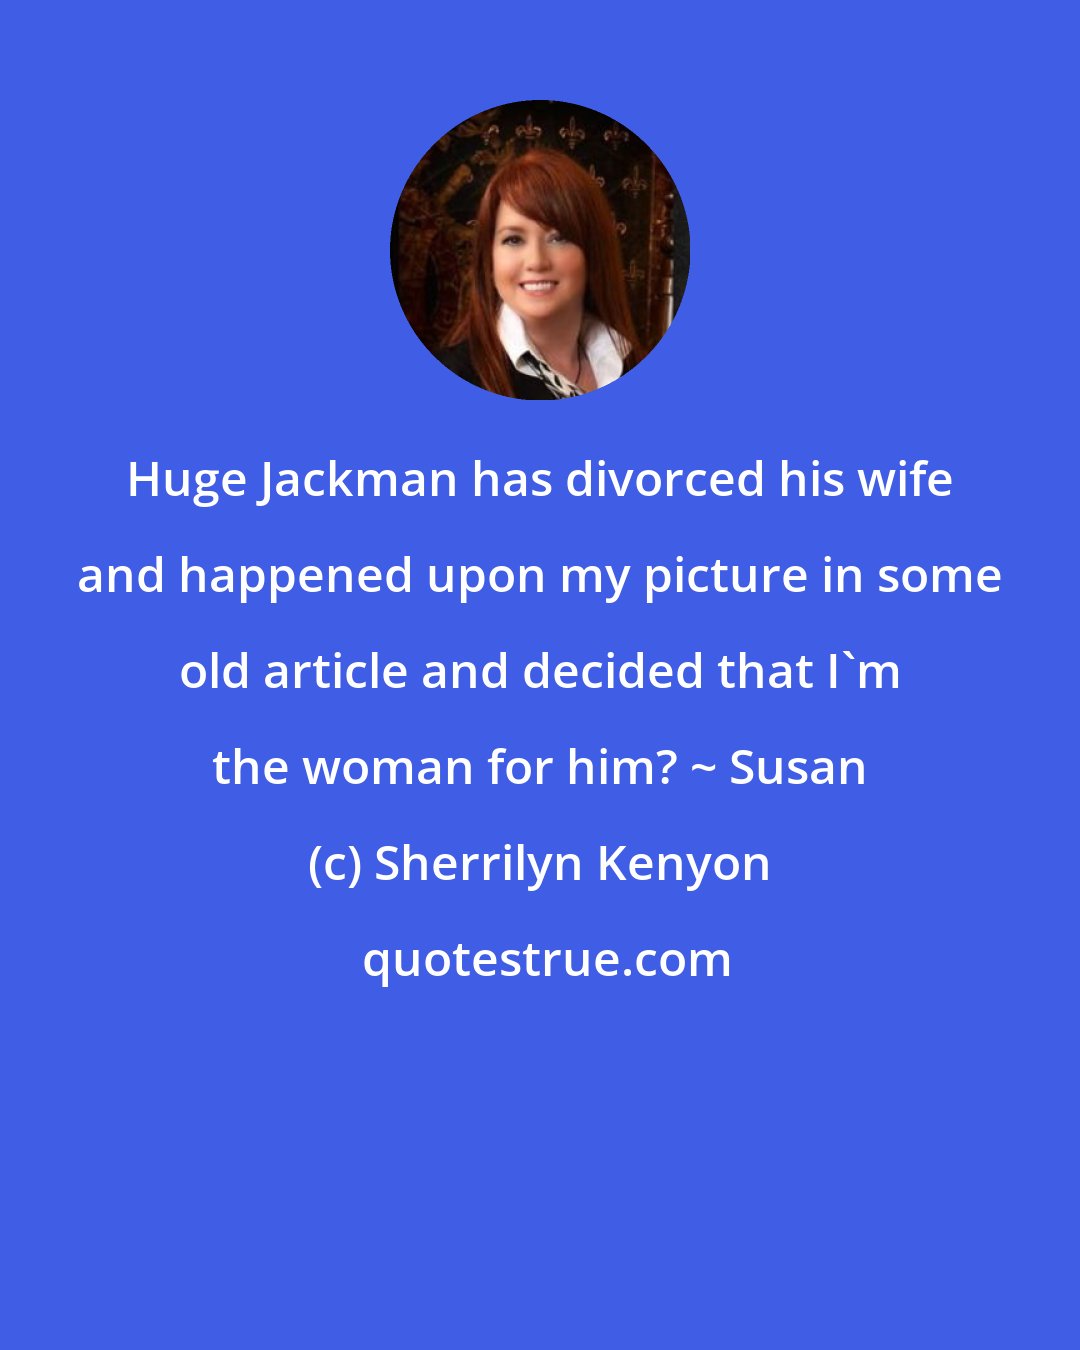 Sherrilyn Kenyon: Huge Jackman has divorced his wife and happened upon my picture in some old article and decided that I'm the woman for him? ~ Susan